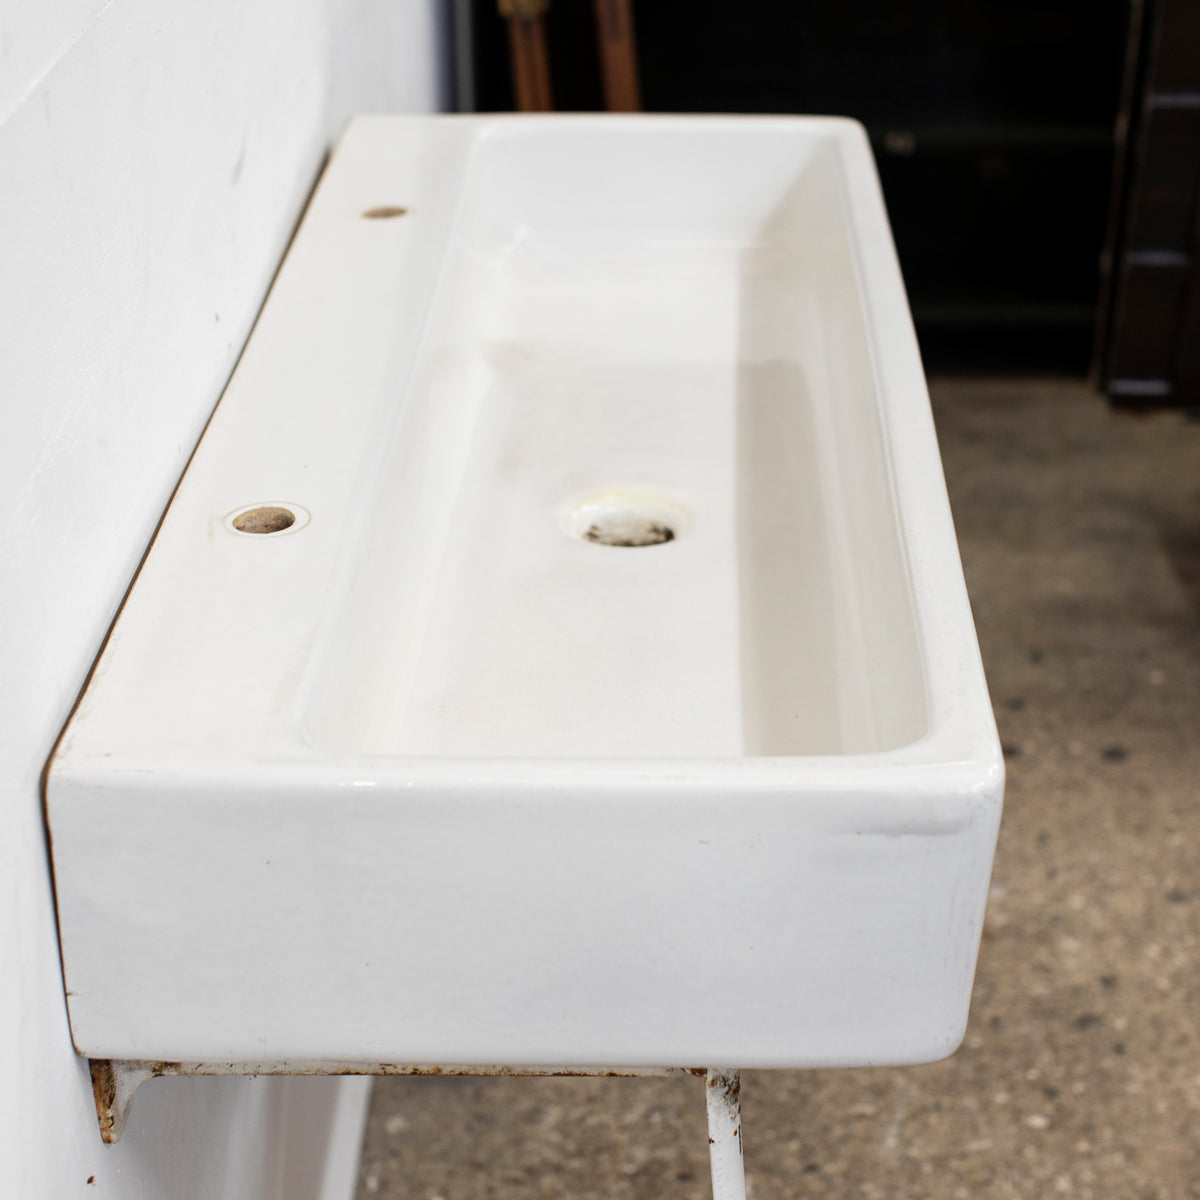 Large Reclaimed Porcelain Trough Sink | The Architectural Forum